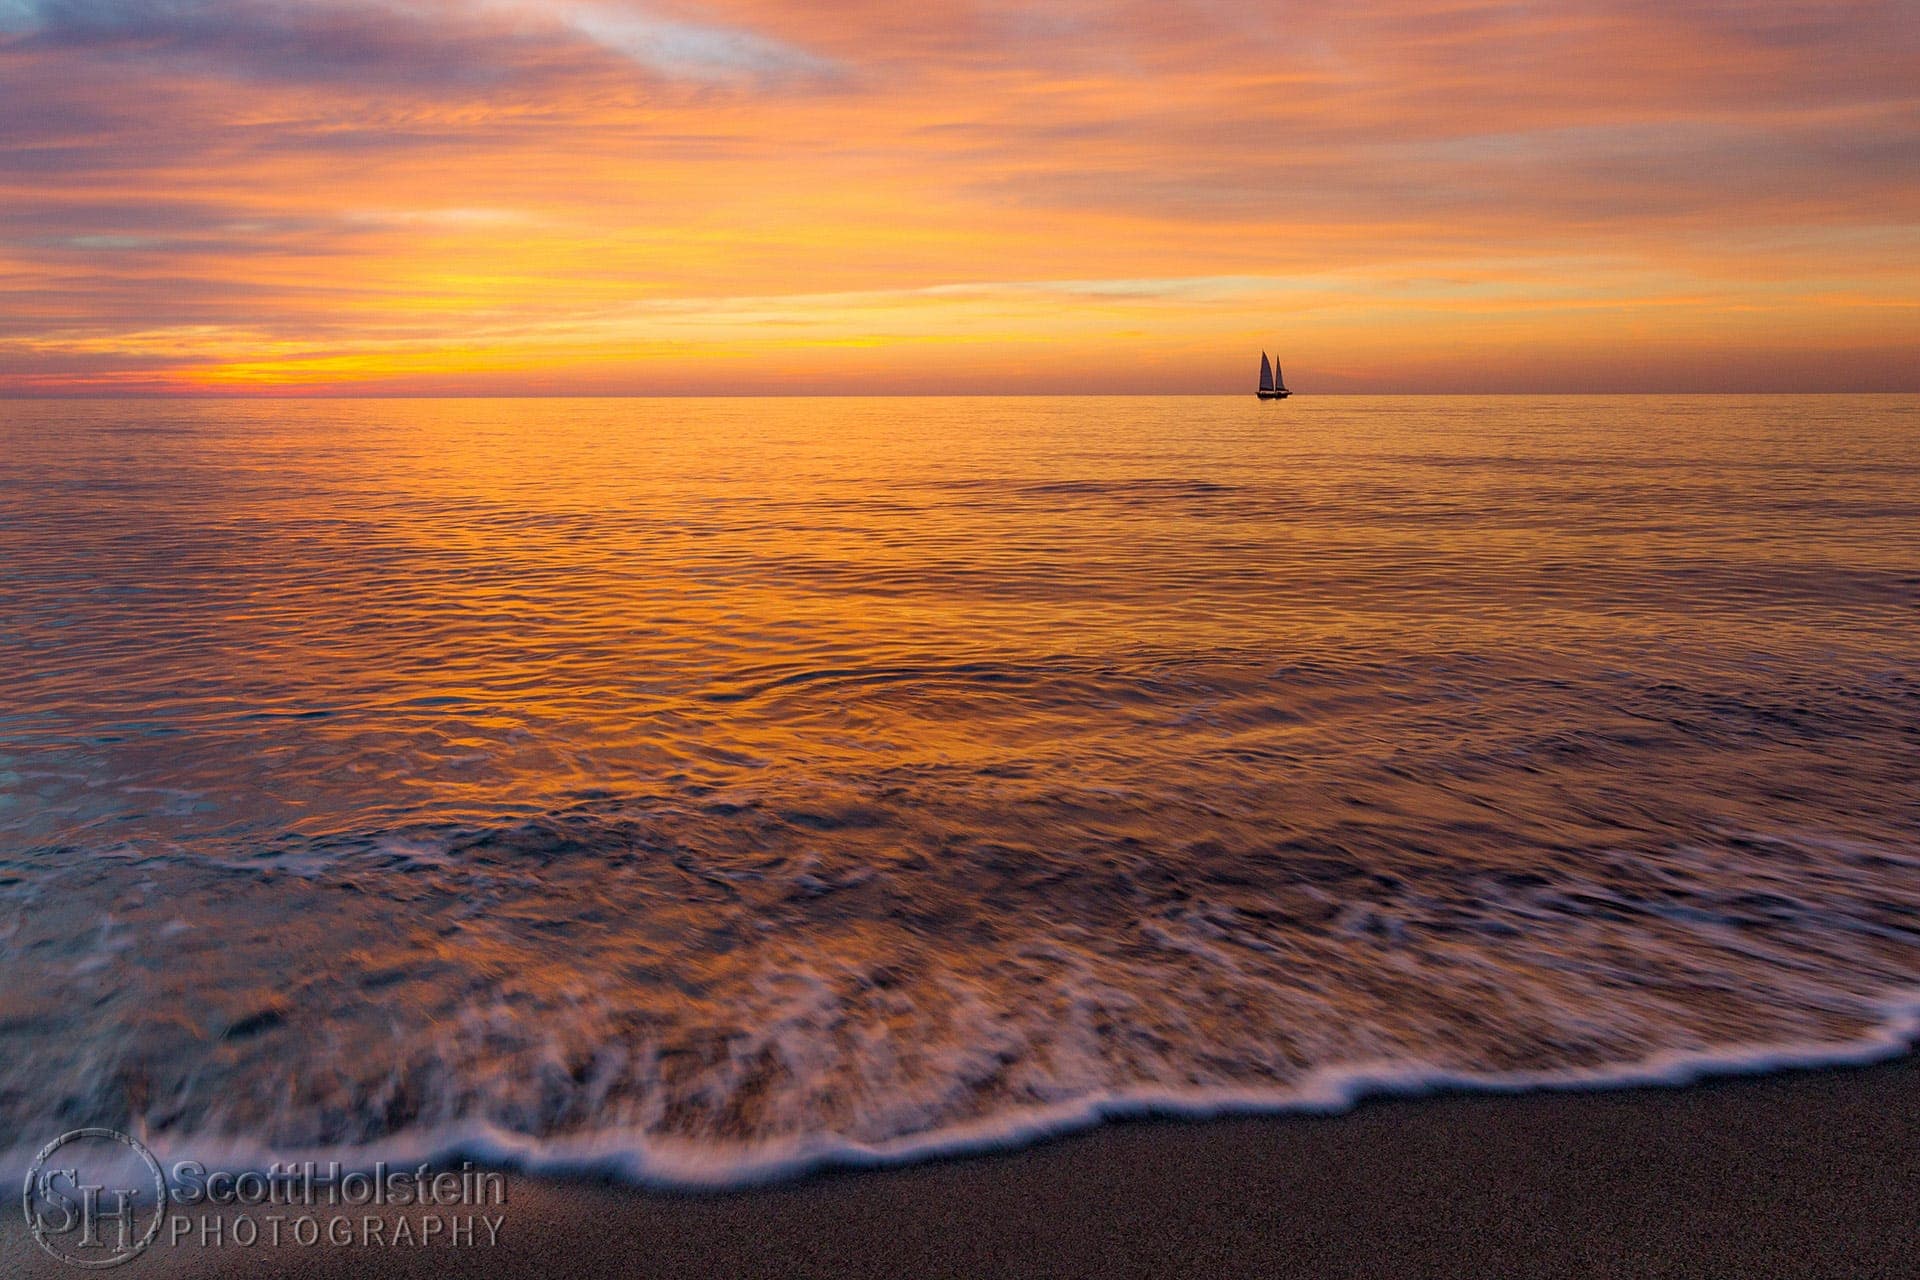 A sailboat punctuates a pastel-colored sunset in the Gulf of Mexico off of a Florida beach.